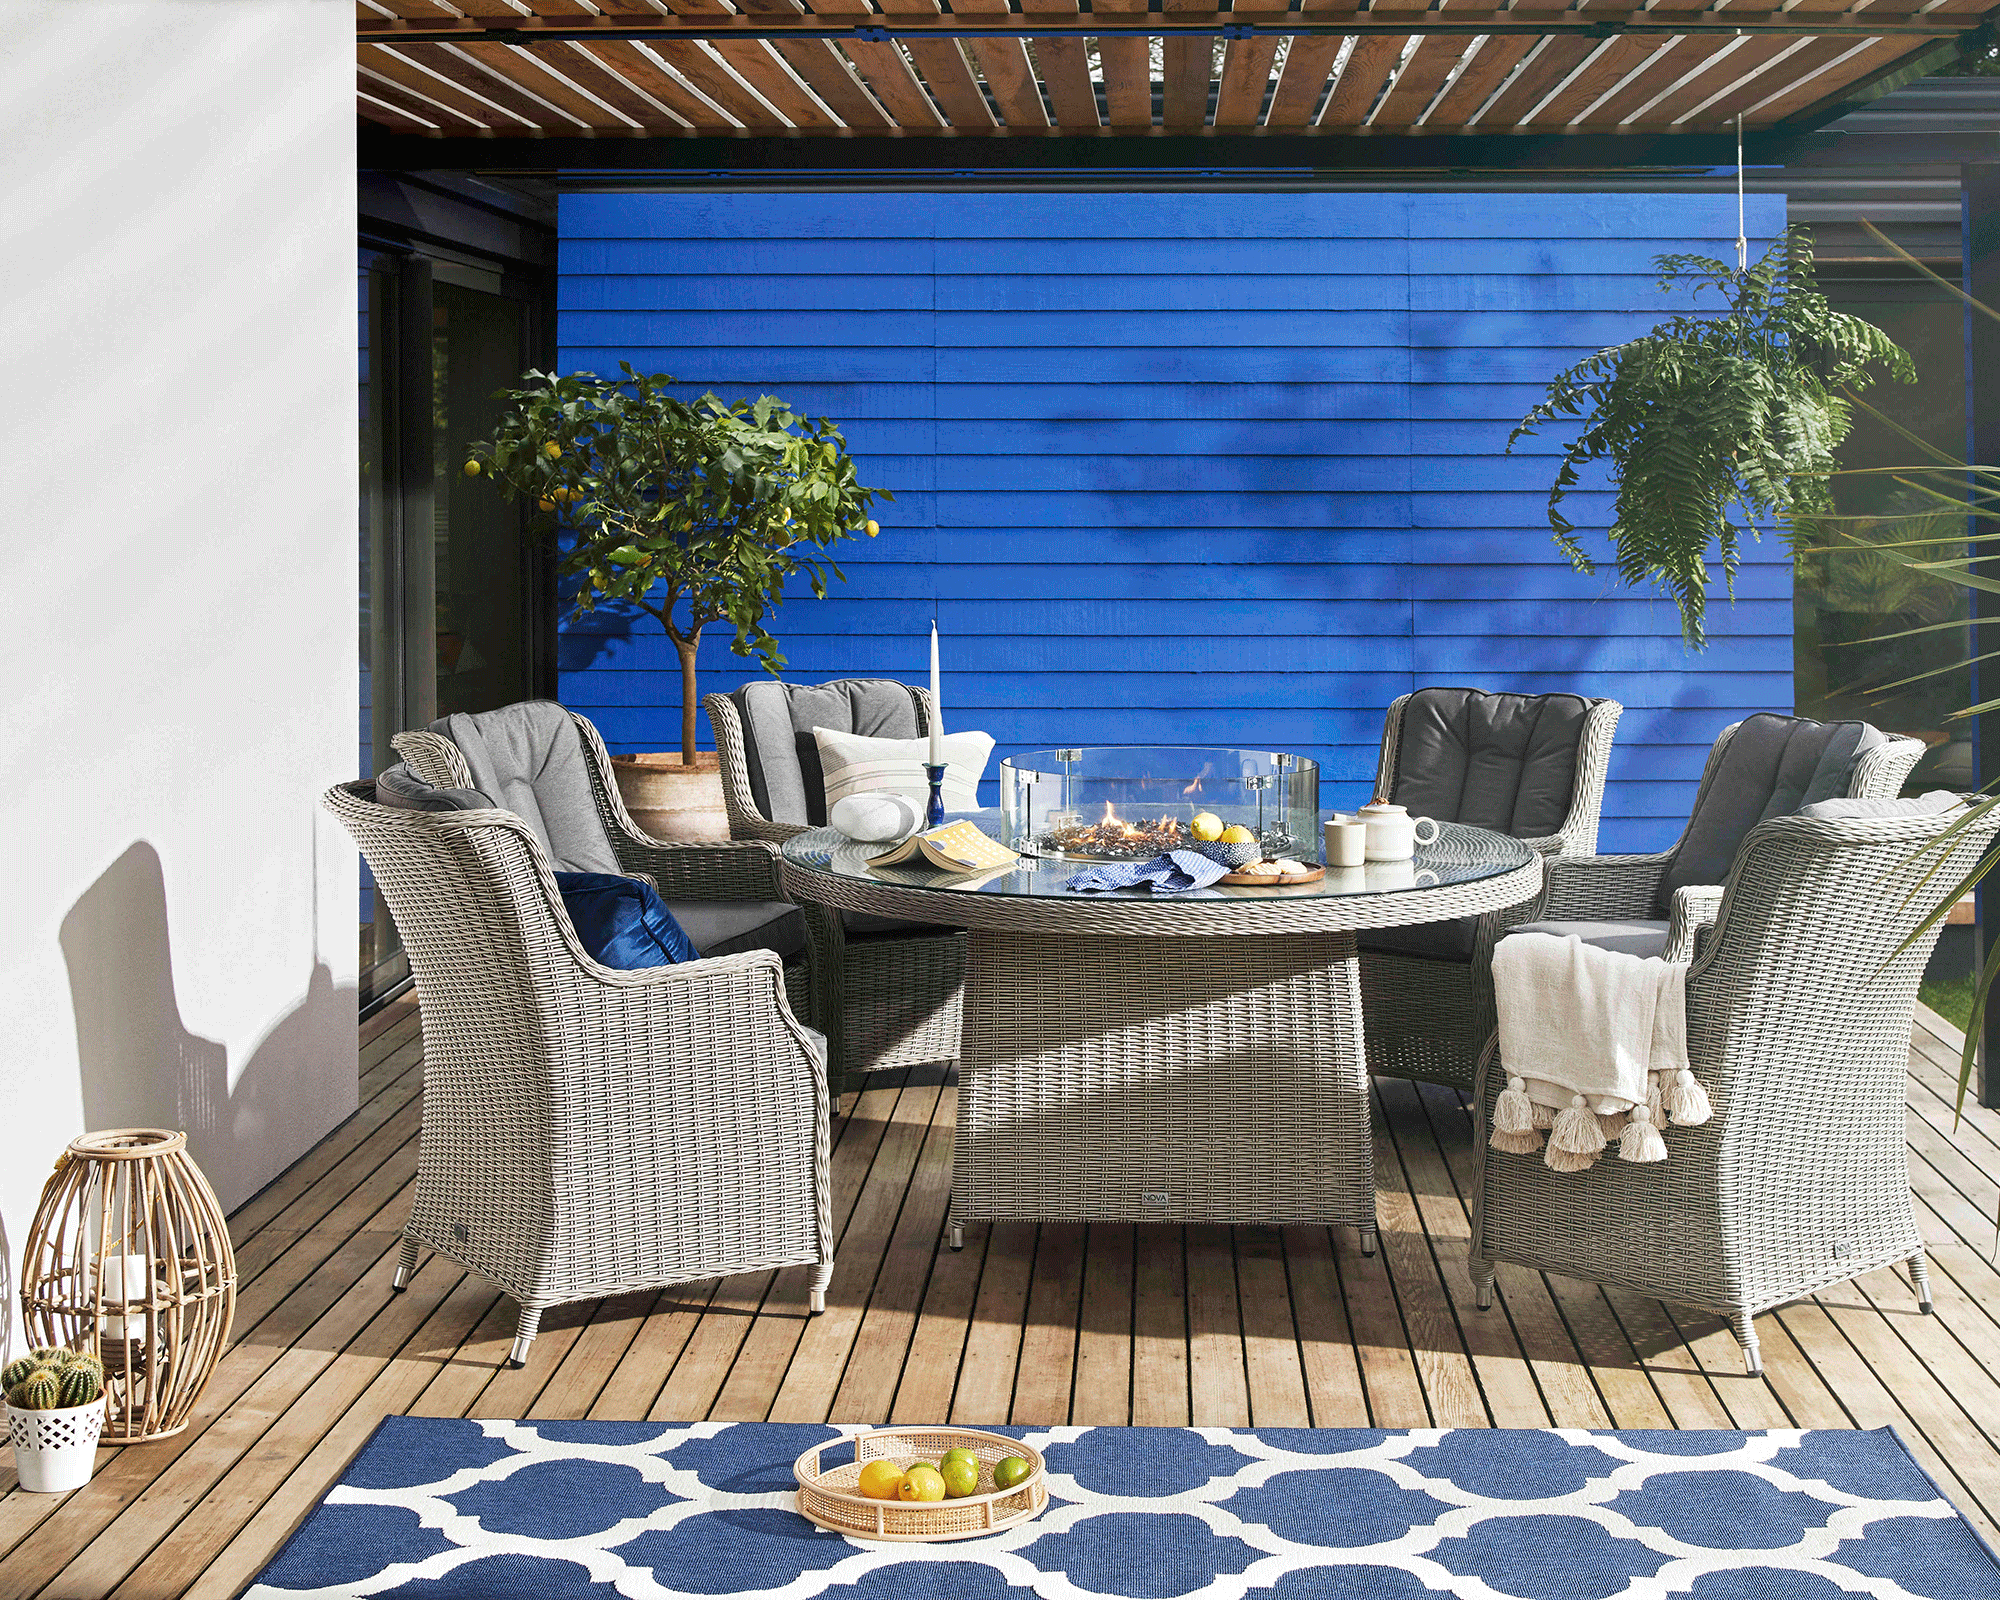 A Med inspired outdoor setting with patio dining chairs and table with central fire pit